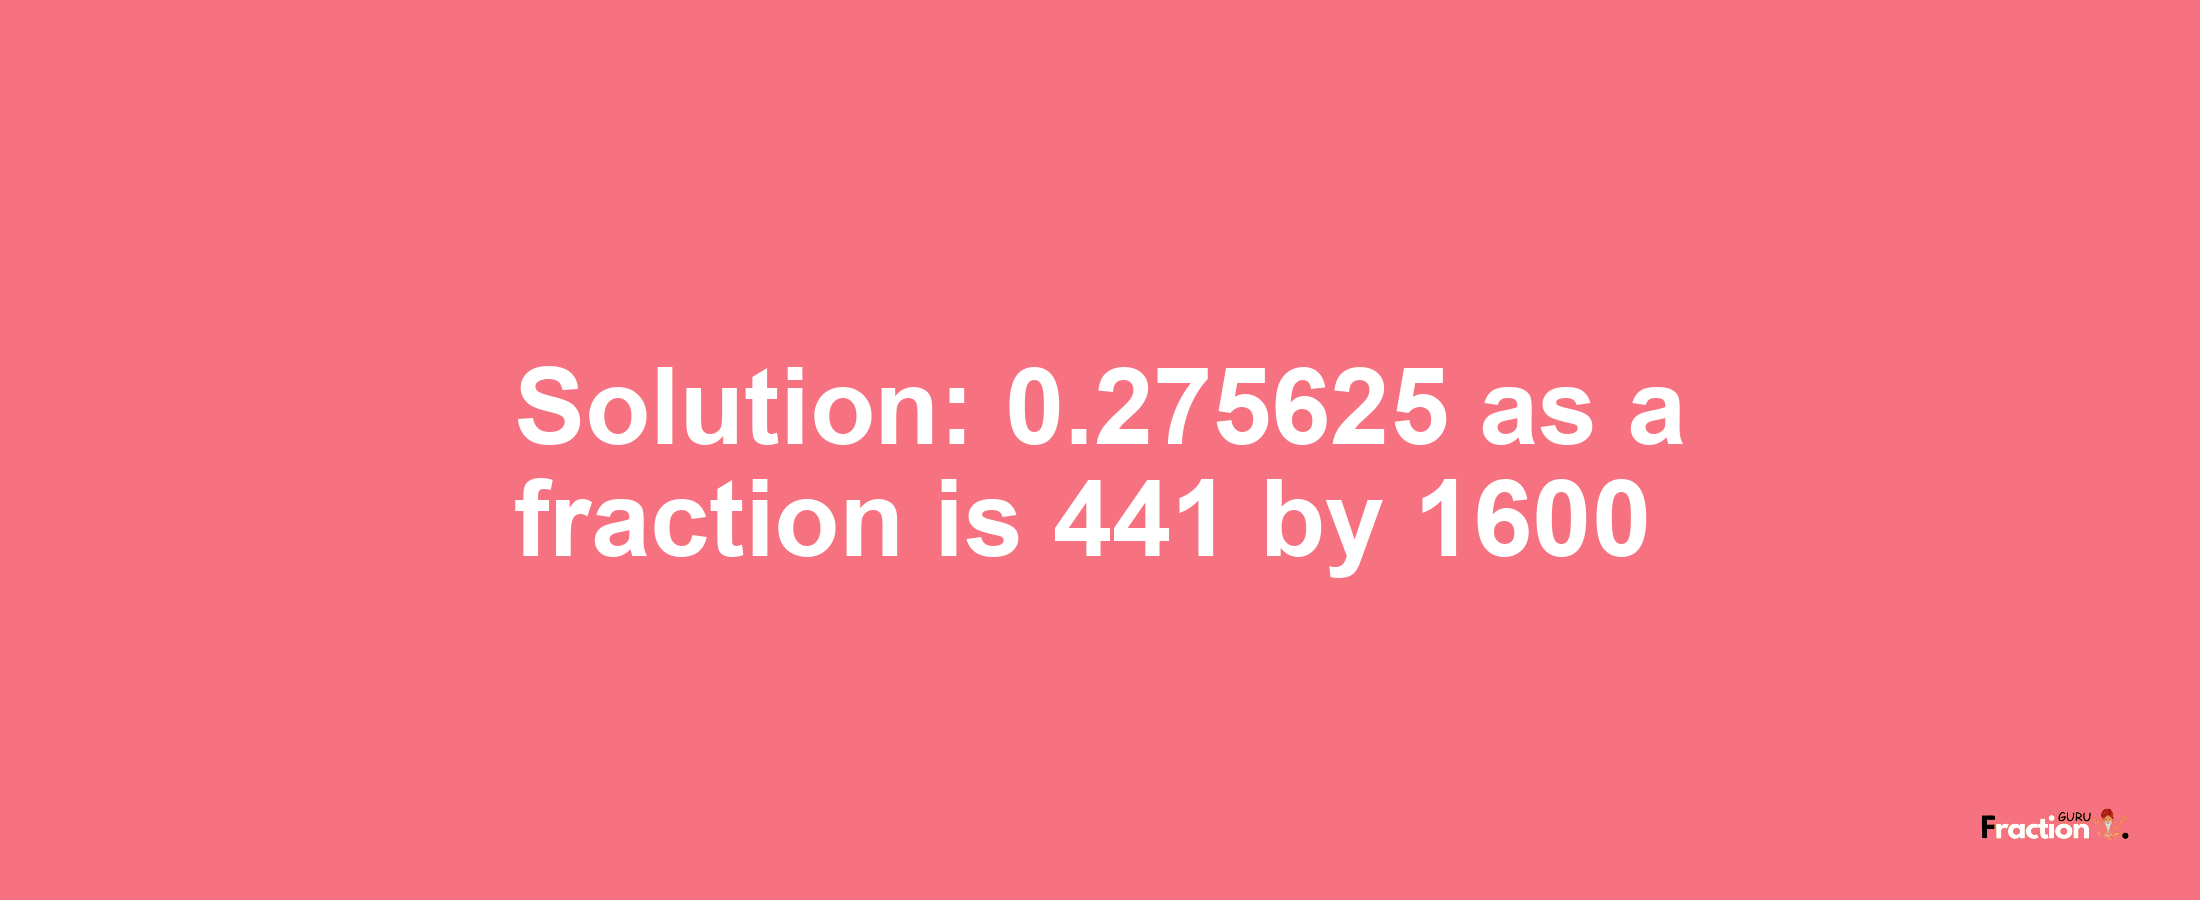 Solution:0.275625 as a fraction is 441/1600